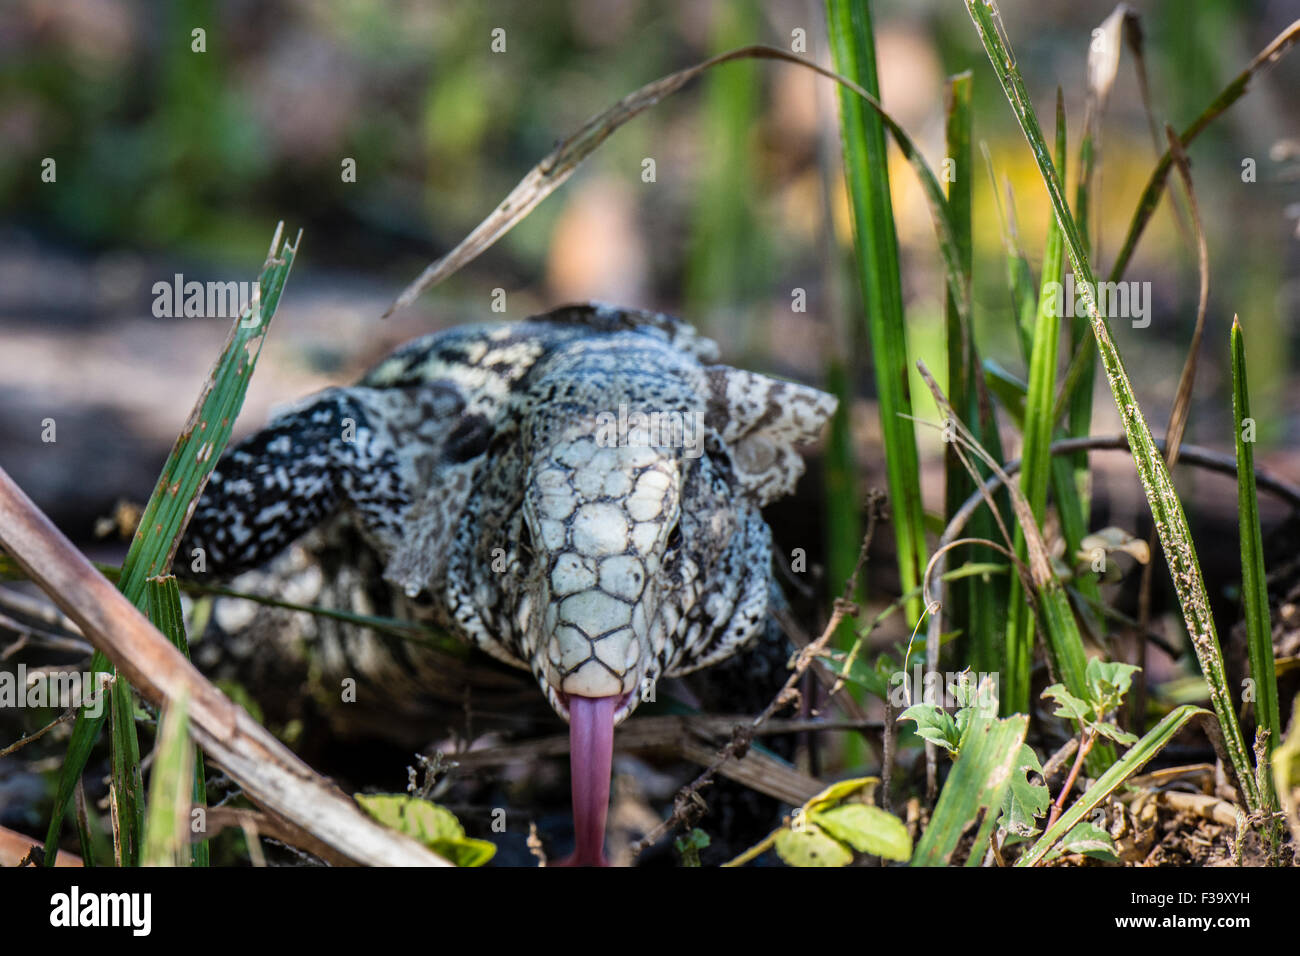 Close-up of a Wild adult Argentine Black and White Tegu,Tupinambis merianae, tongue out, Panatanal, Mato Grosso, Brazil, South America. Stock Photo